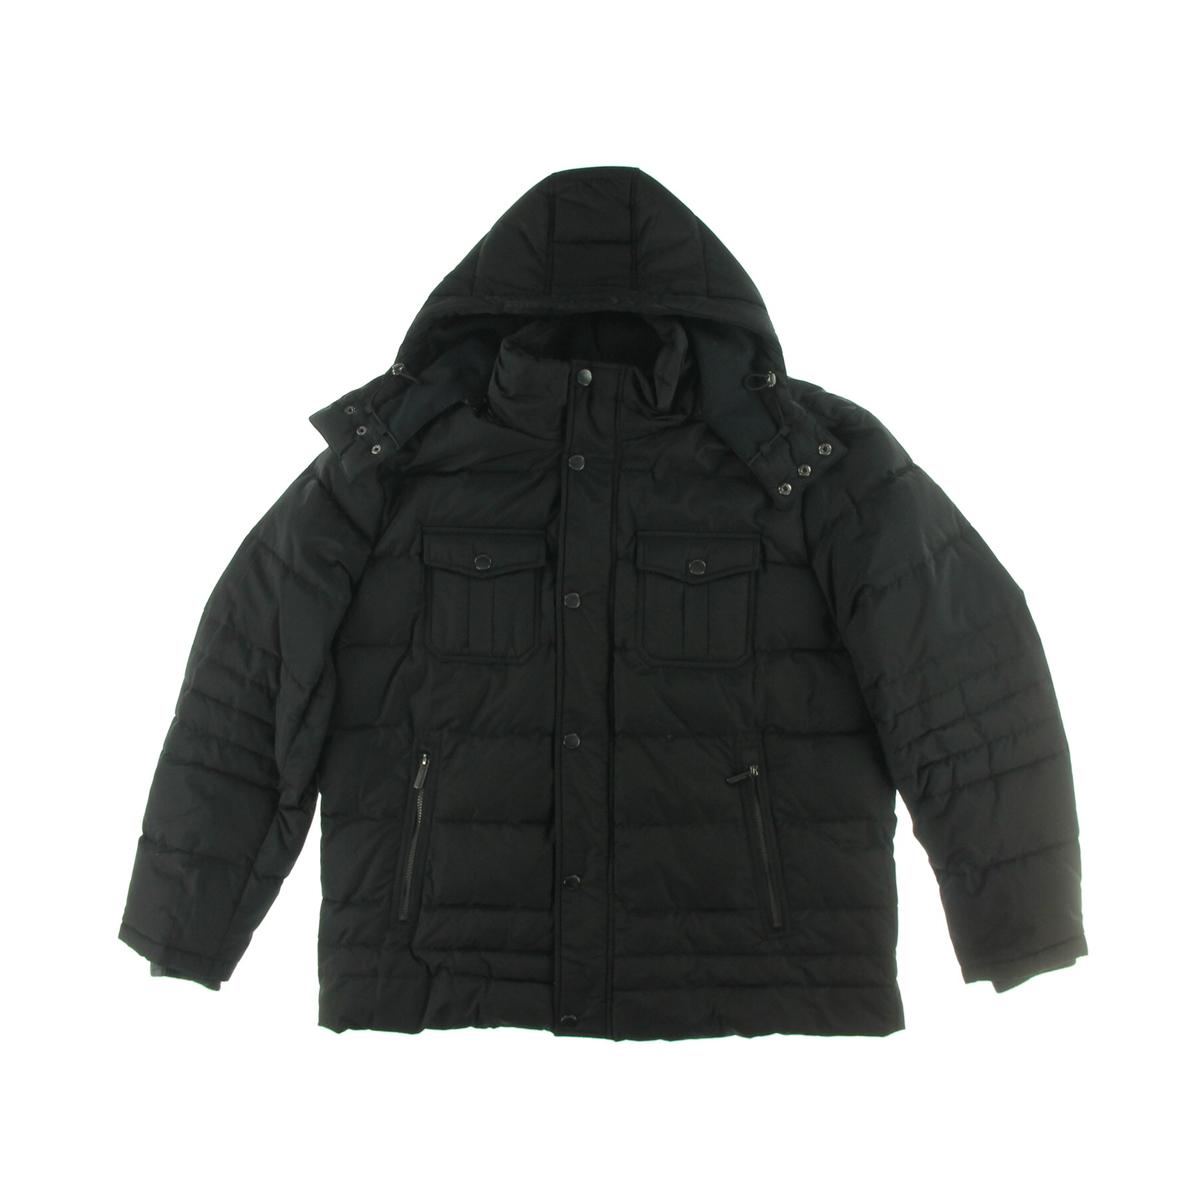 London Fog 0703 Mens Down Quilted Hipster Coat Outerwear BHFO | eBay